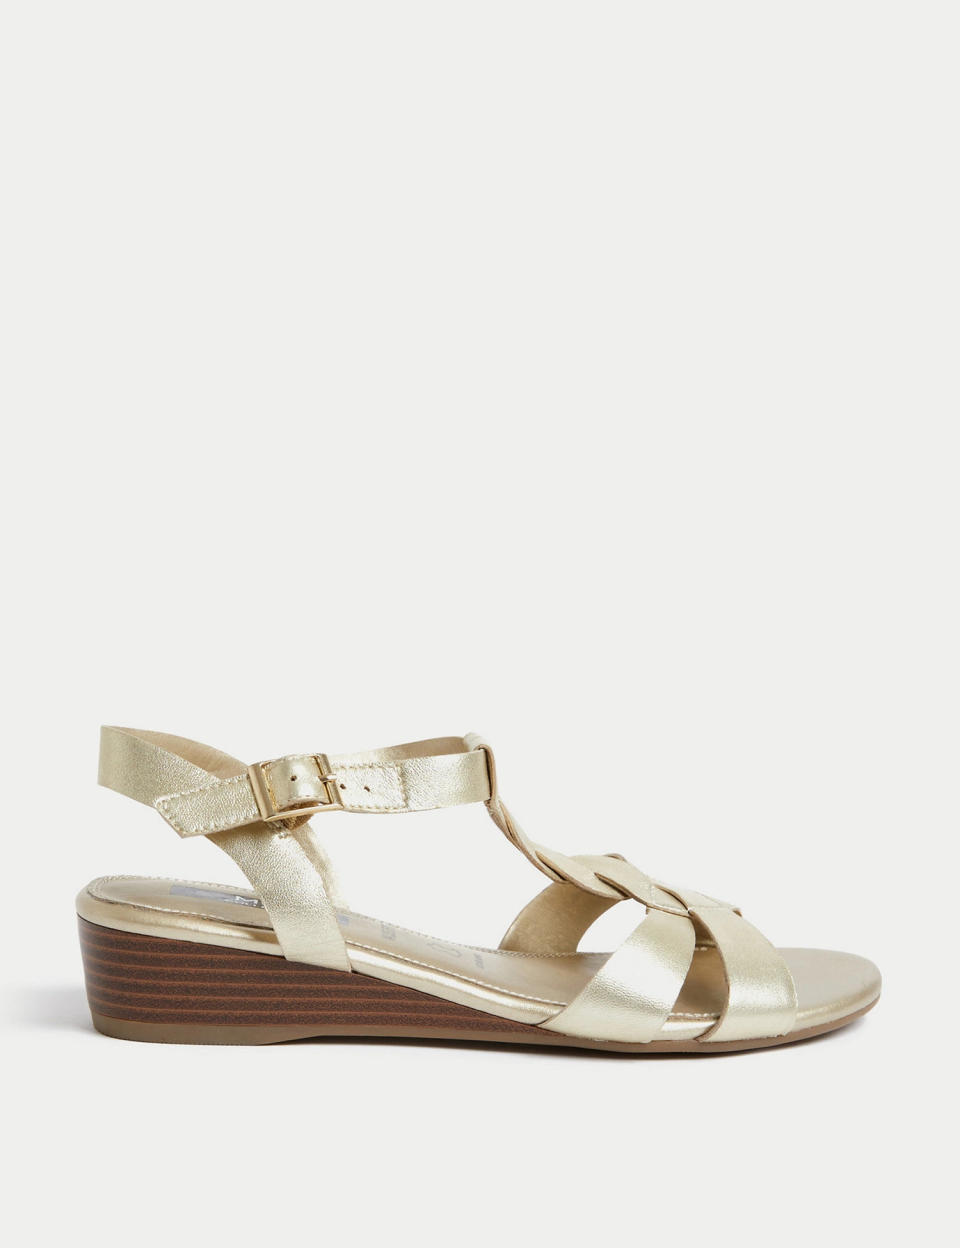 This luxe-looking gold leather pair have the cutest little wedge for a little lift. (Marks & Spencer)